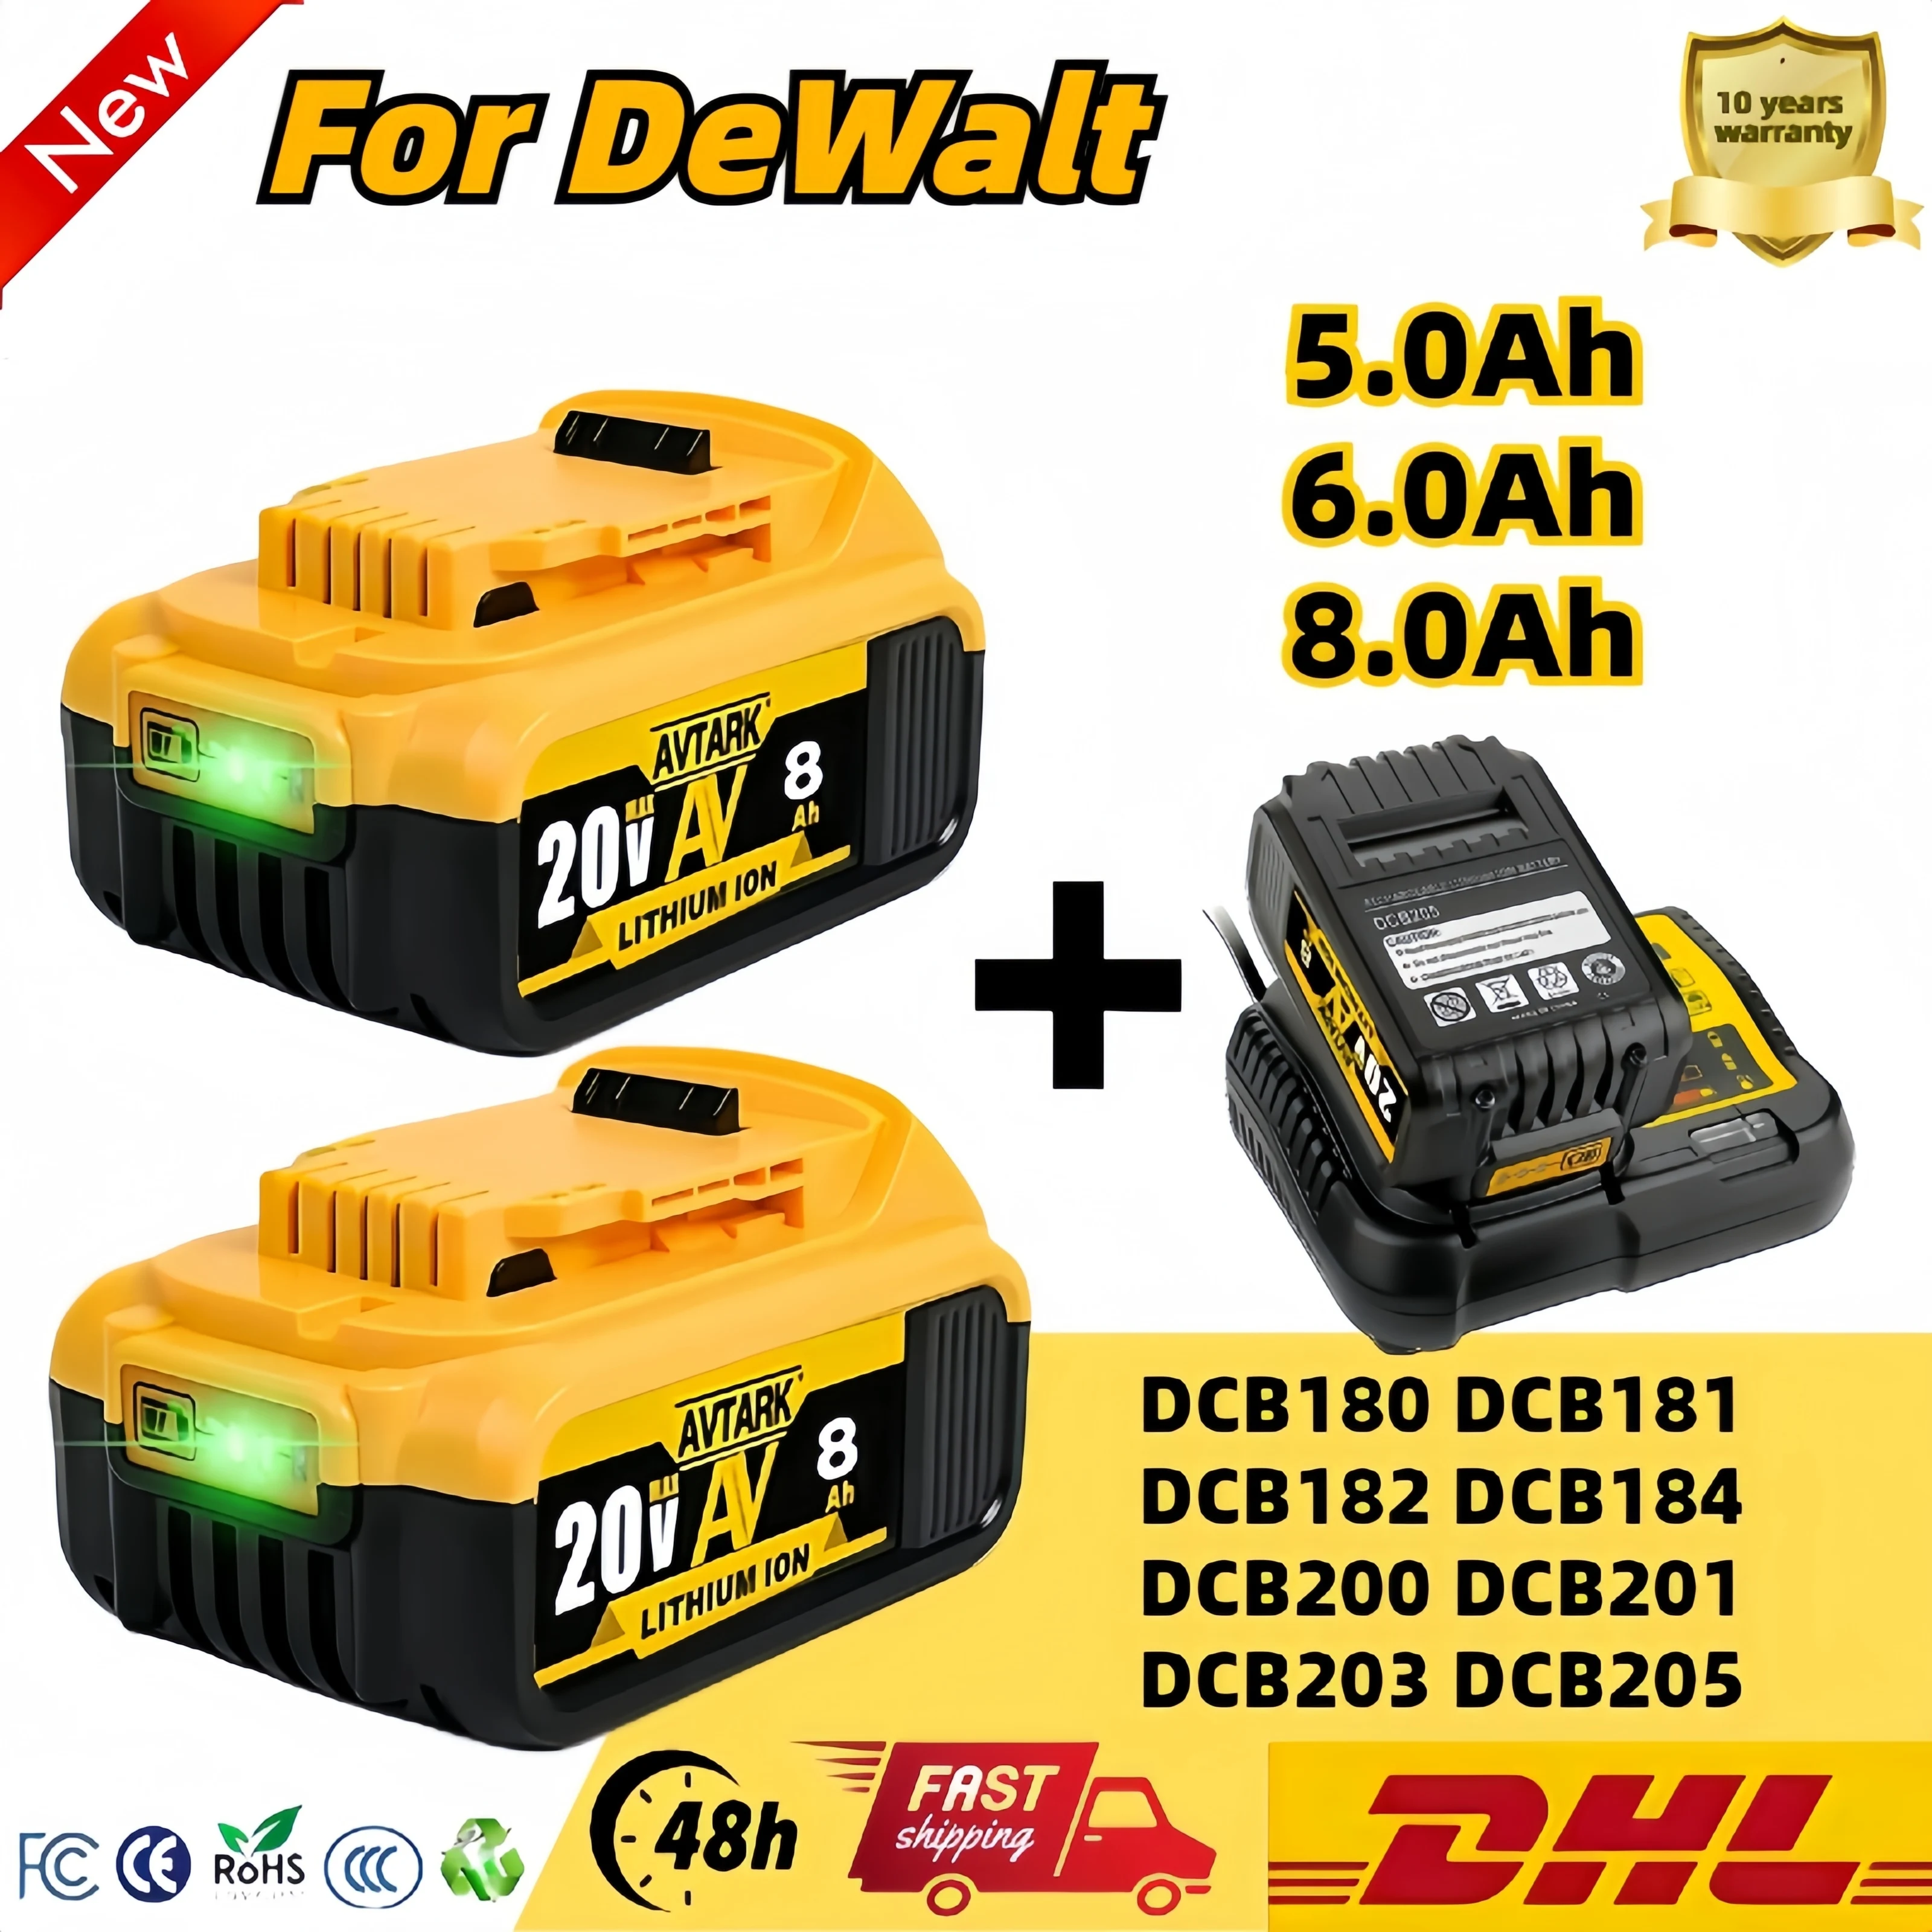 

For Dewalt 20V Battery 8.0Ah Replacement Battery For Dewalt DCB200 Rechargeable Battery DCB206 DCB207 DCB204 Power Tool